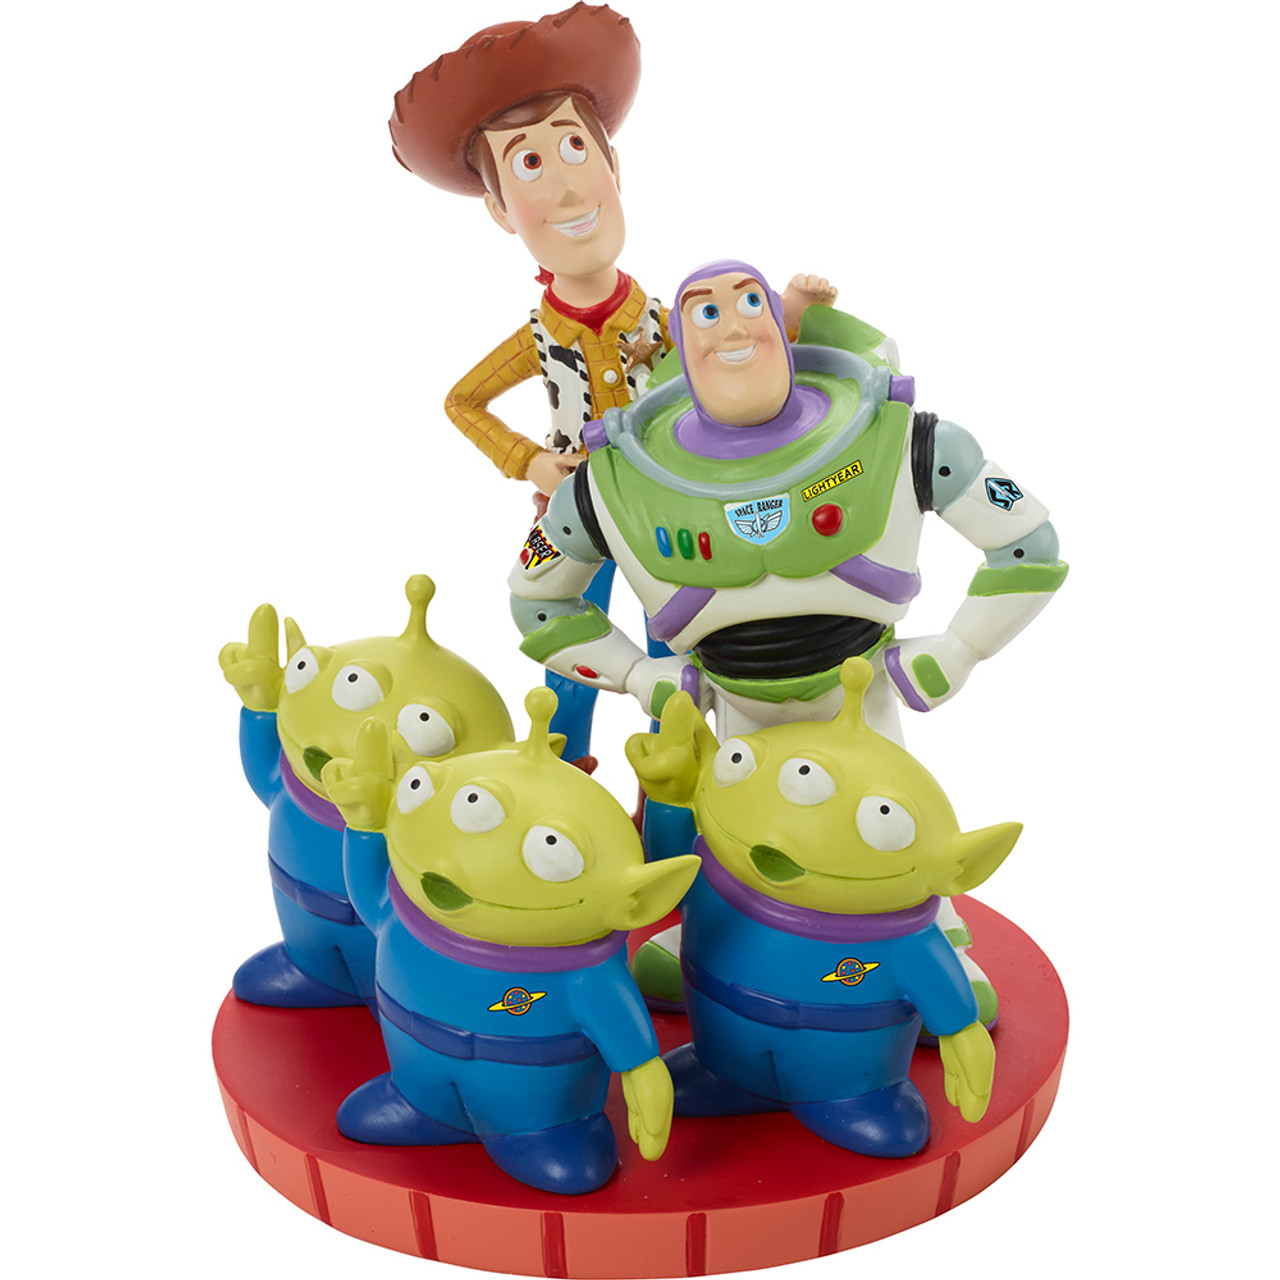 Toy Story 5 set to bring back Woody and Buzz Lightyear, Disney's